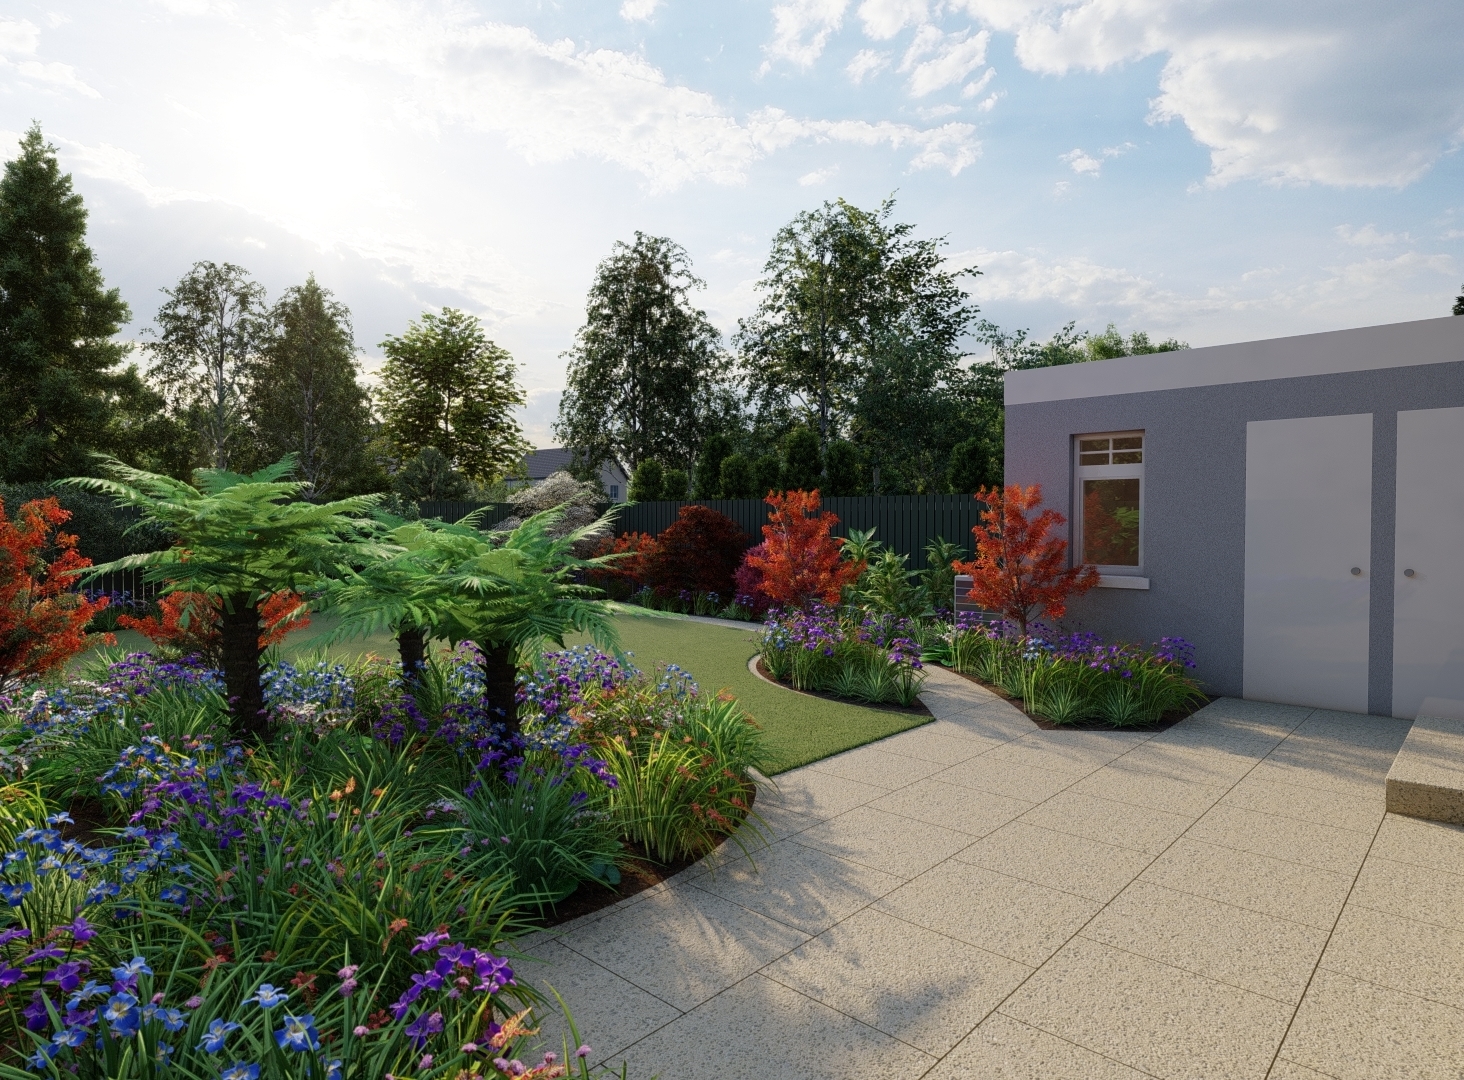 Design Visual for family garden in Foxrock, Dublin 18, featuring sweeping Limestone pathway, rol turf lawn area, Specimen trees and shrubs, & Limestone Patio